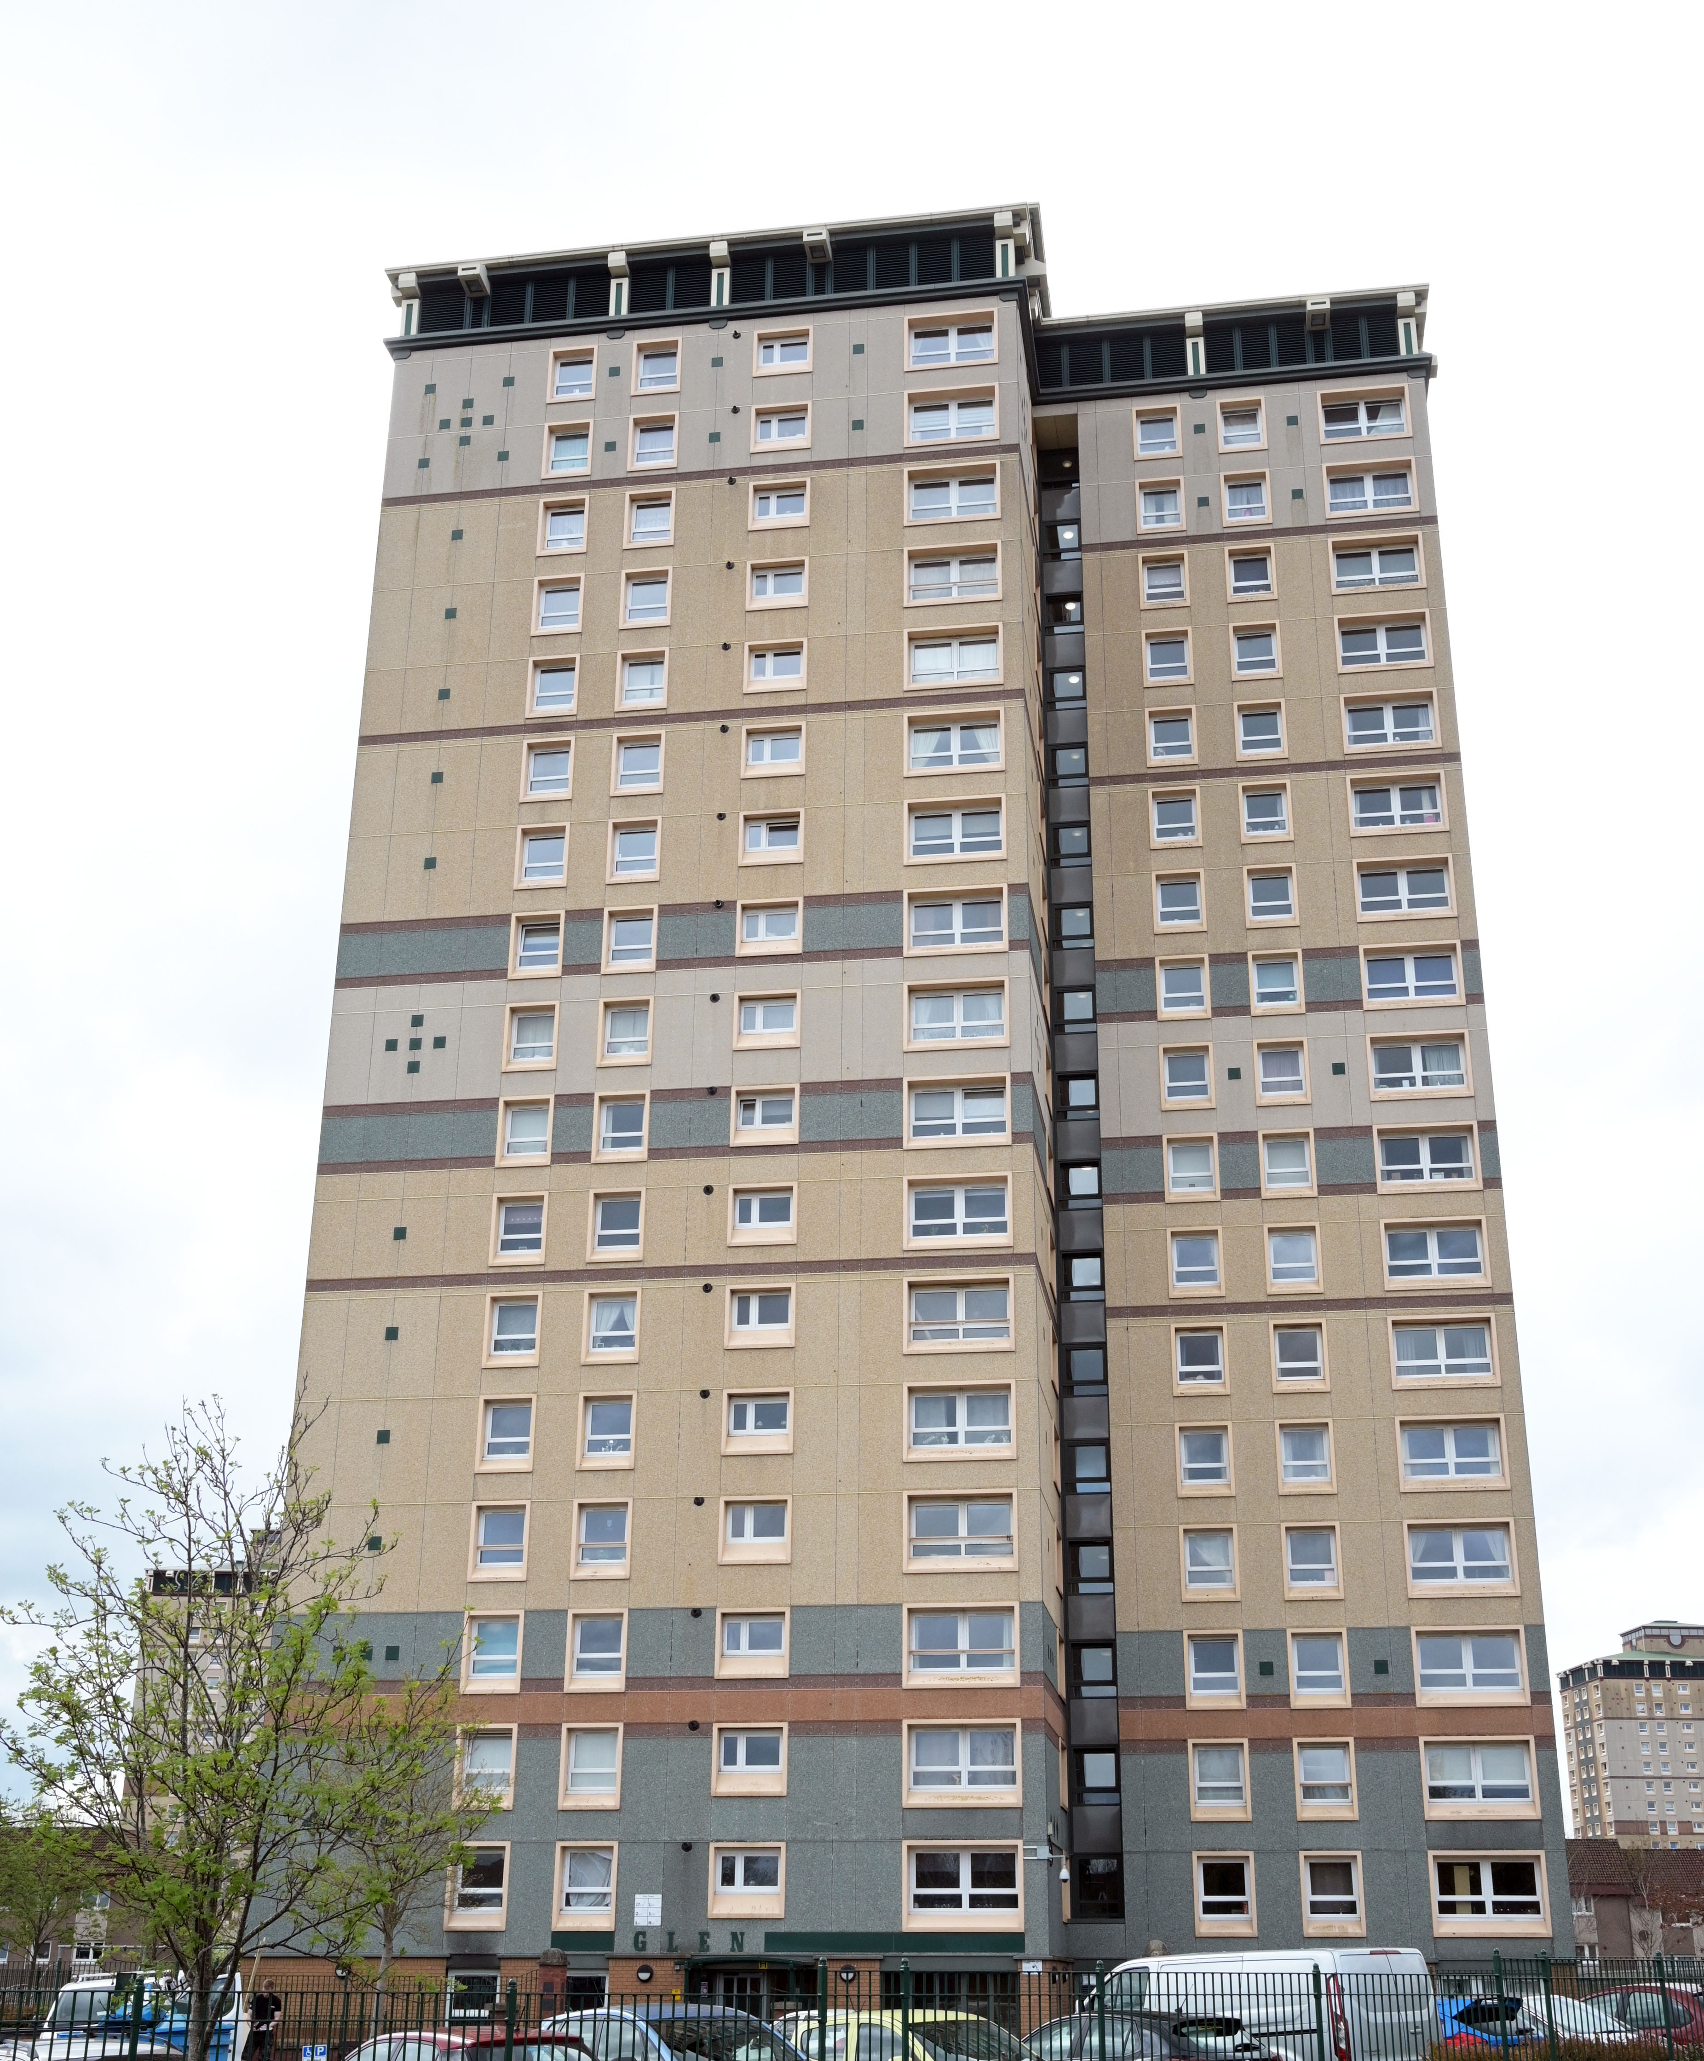 North Lanarkshire approves plans to demolish nearly 1,000 flats